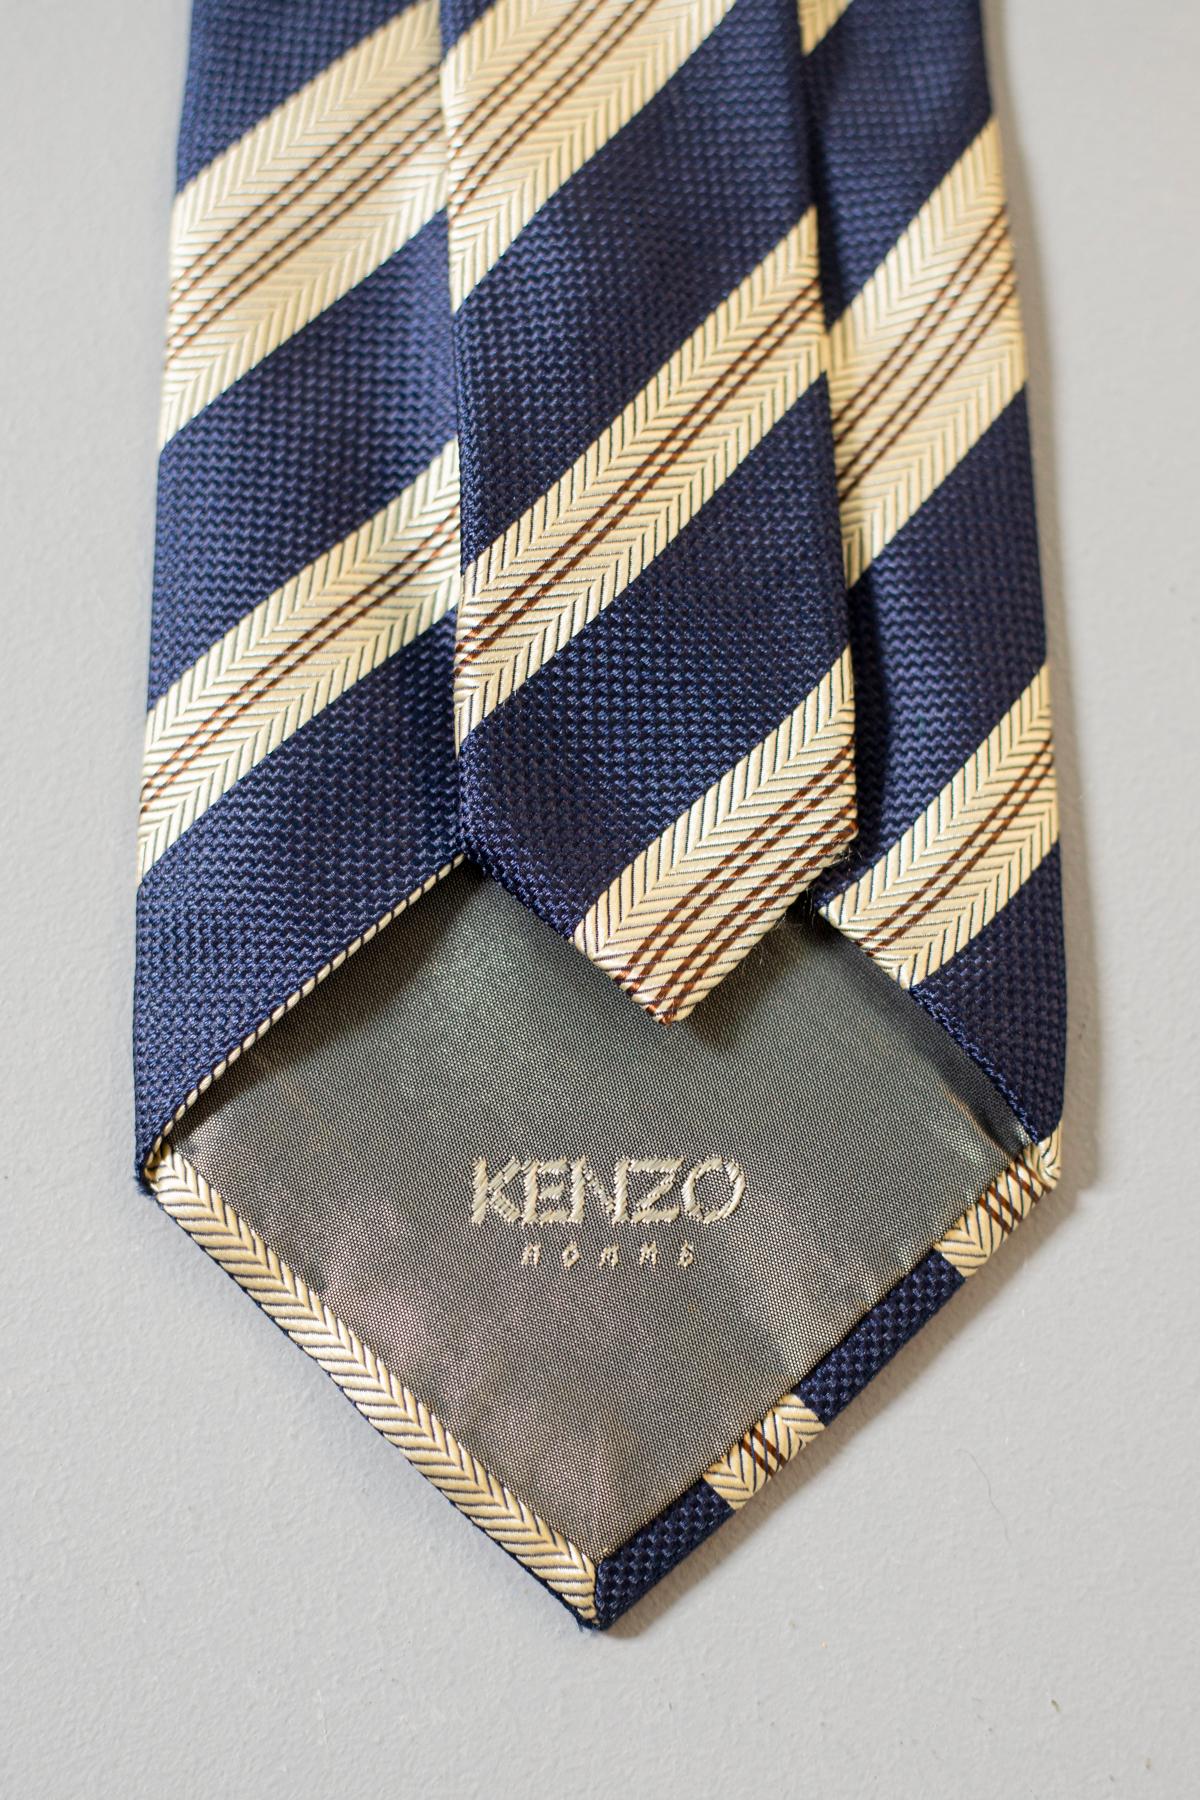 This Kenzo vintage tie is an evergreen. Made in France and designed for Kenzo Homme collection, this tie is a must-have. Decorated with white and beige stripes on a blue background, this accessory is perfect for every formal and informal occasion.